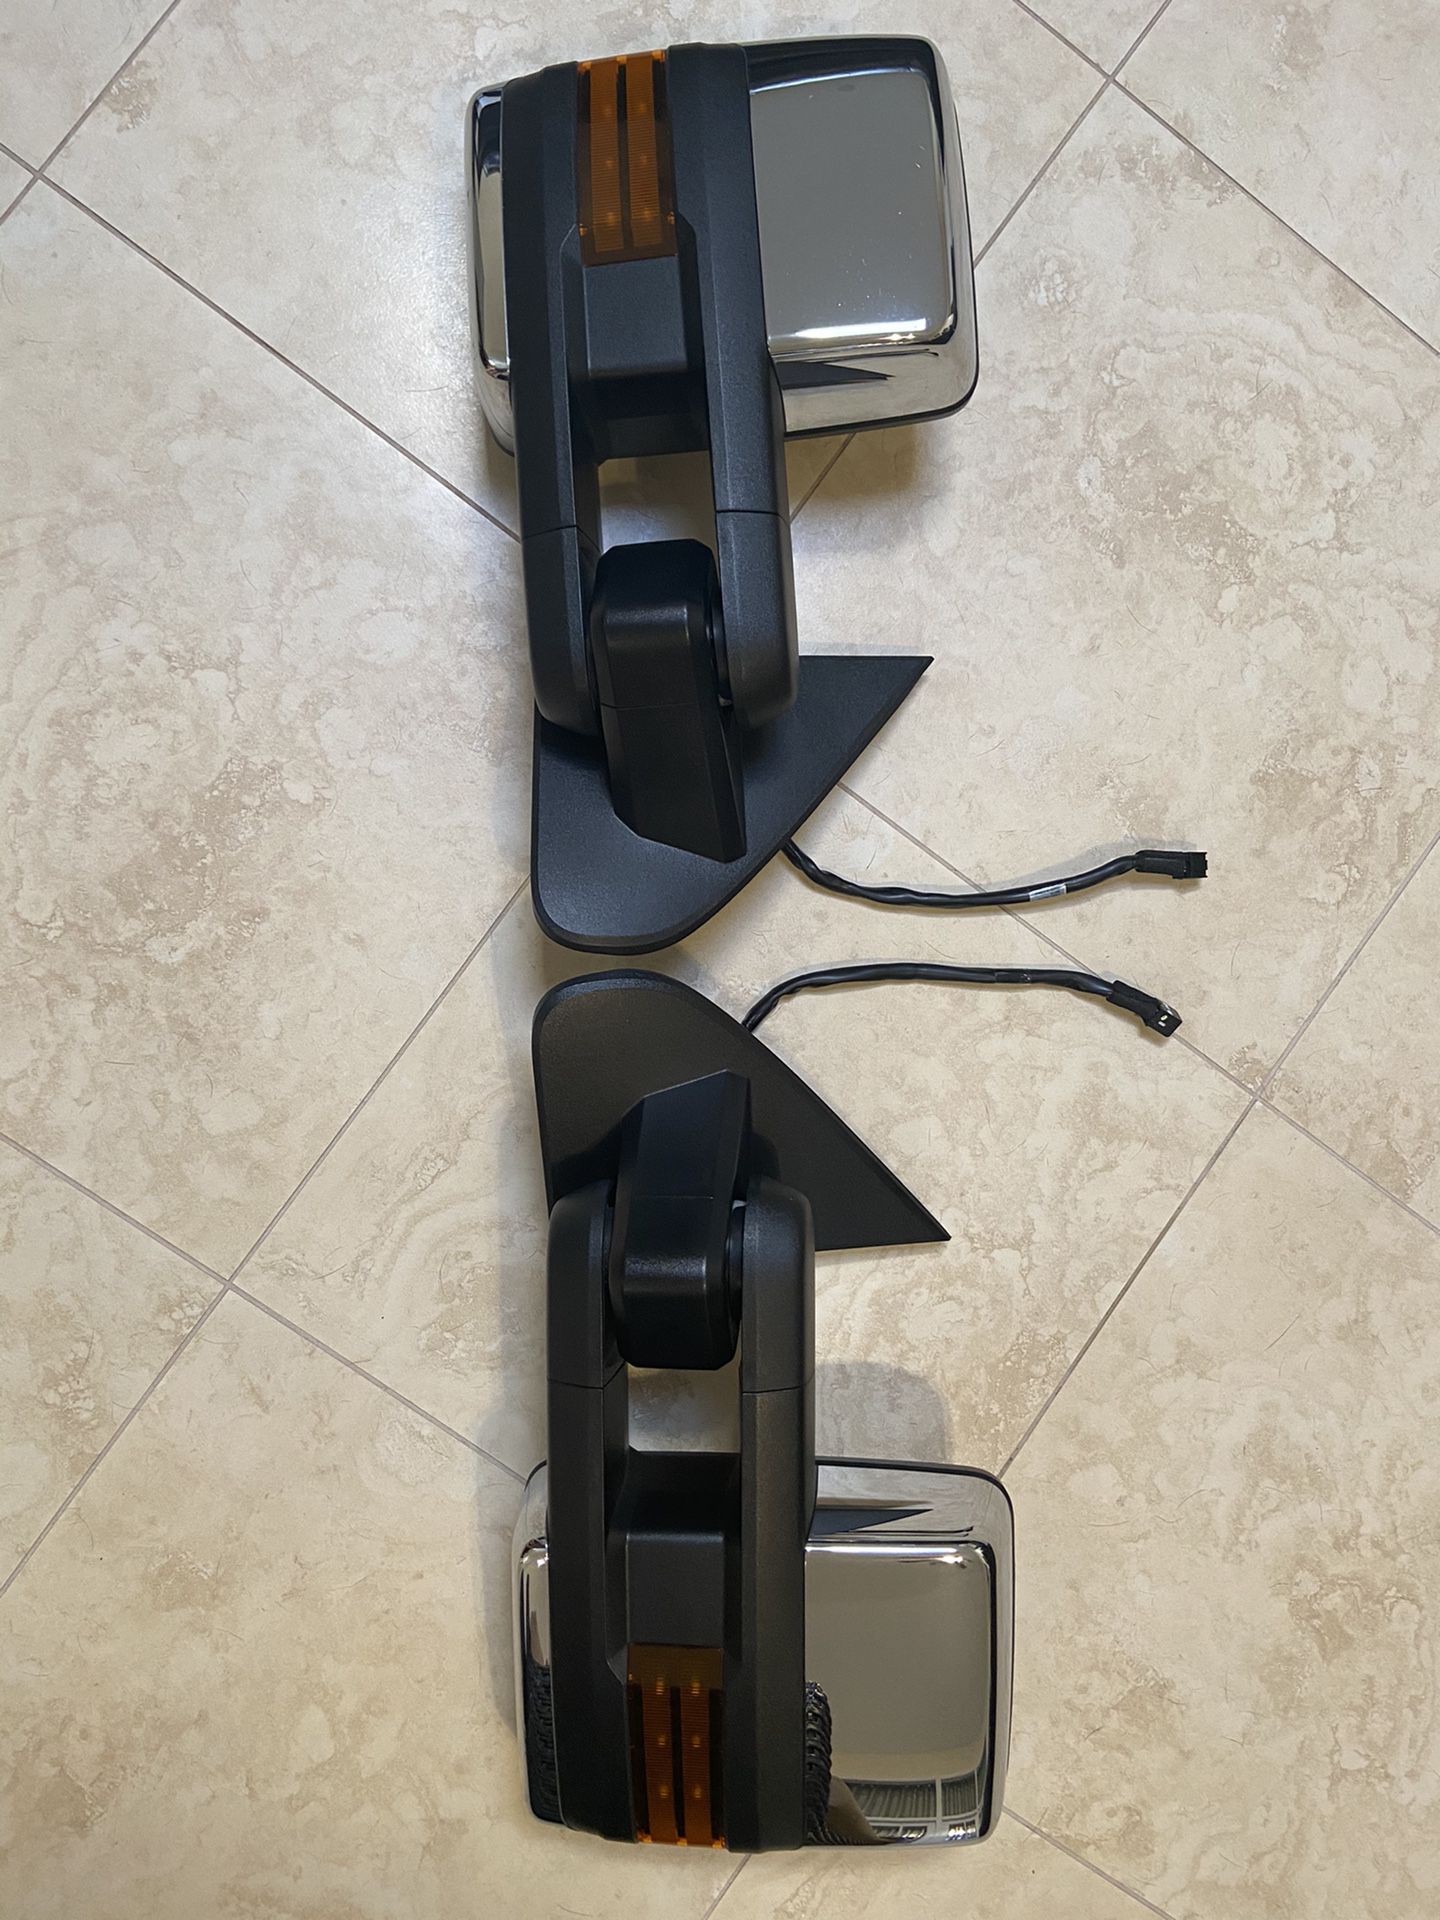 Chevy/GMC Tow Mirrors